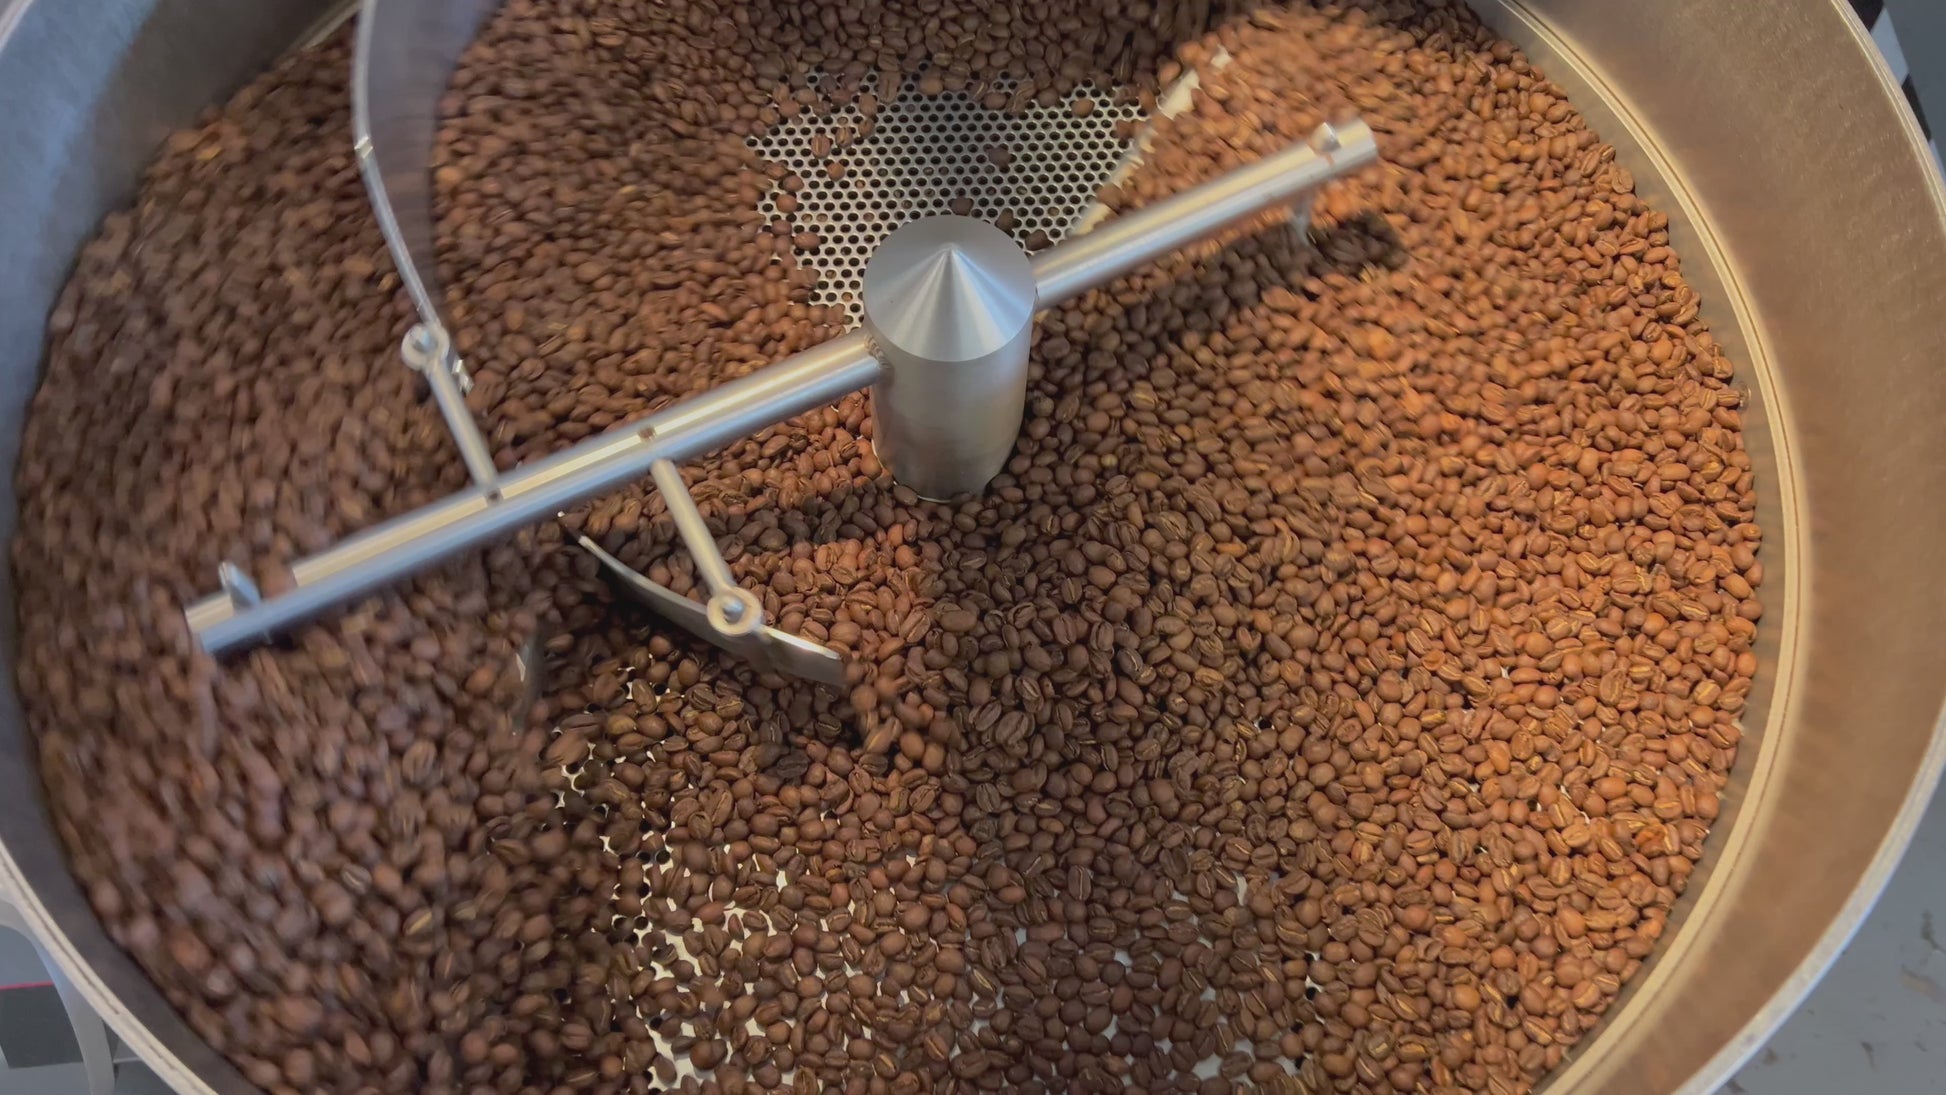 Cooling down! This video shows the beans after they have come out of the roaster and are on the cooler.